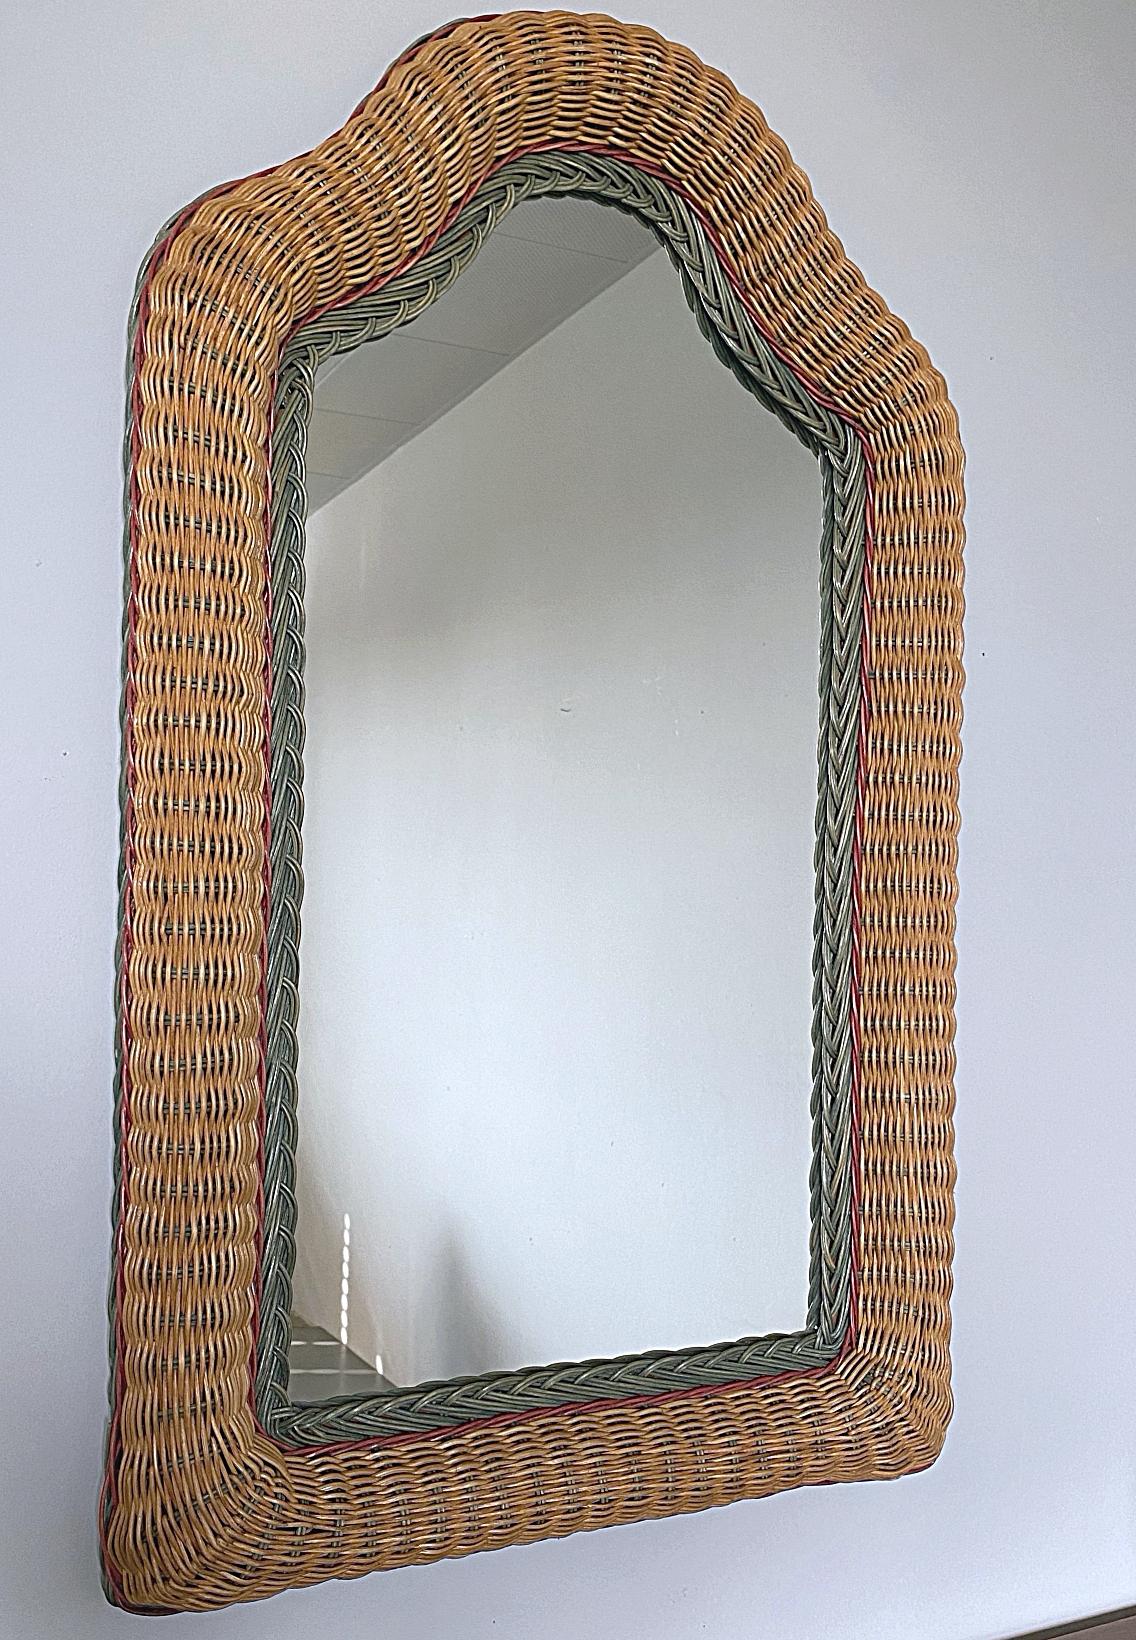 Mid-Century Modern Artisanal Wicker Rattan Midcentury Arched Wall Mirror, 1960s, France